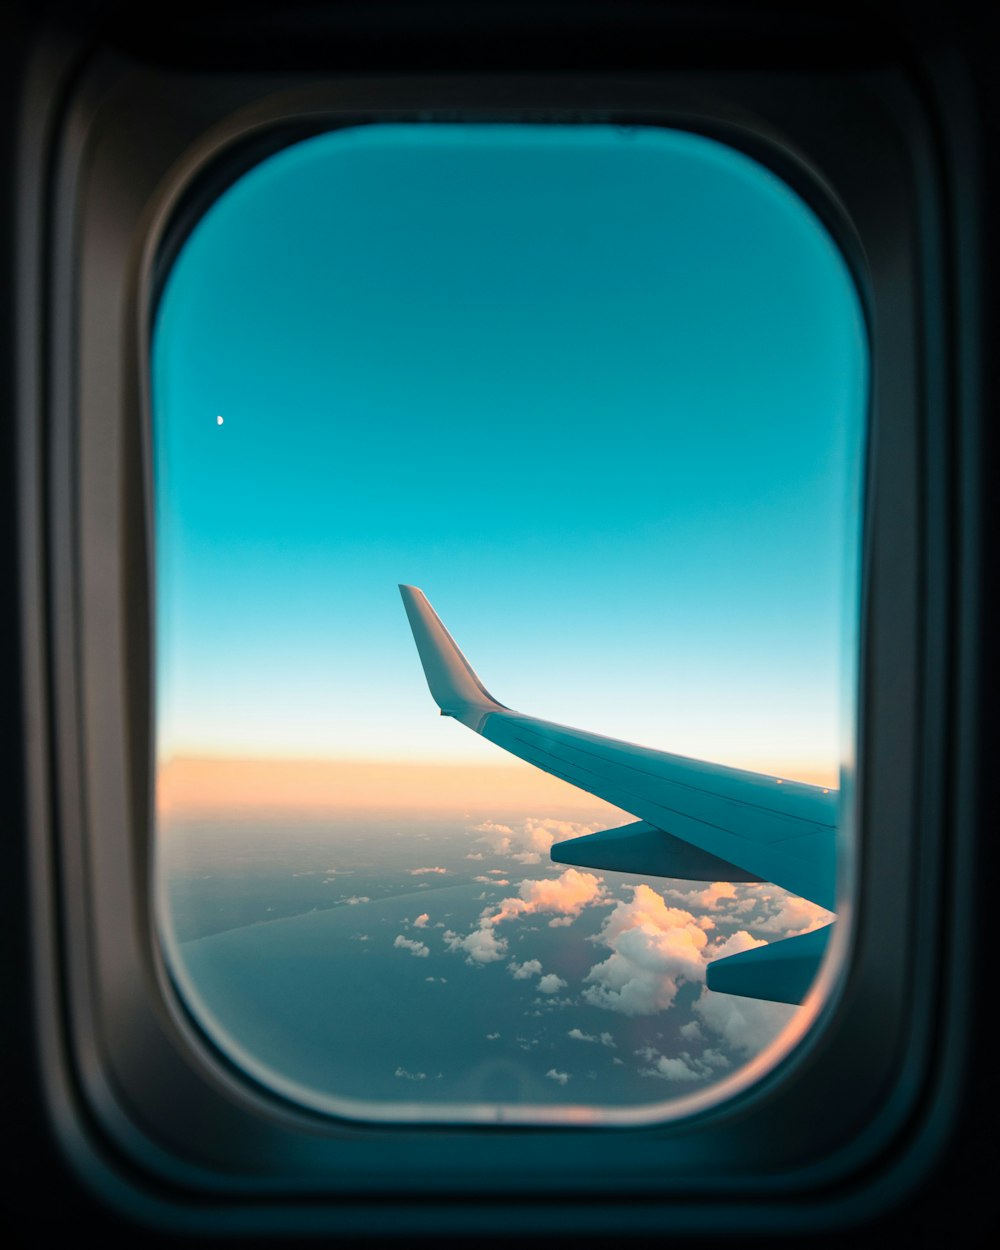 100+ Plane Window Pictures | Download Free Images on Unsplash